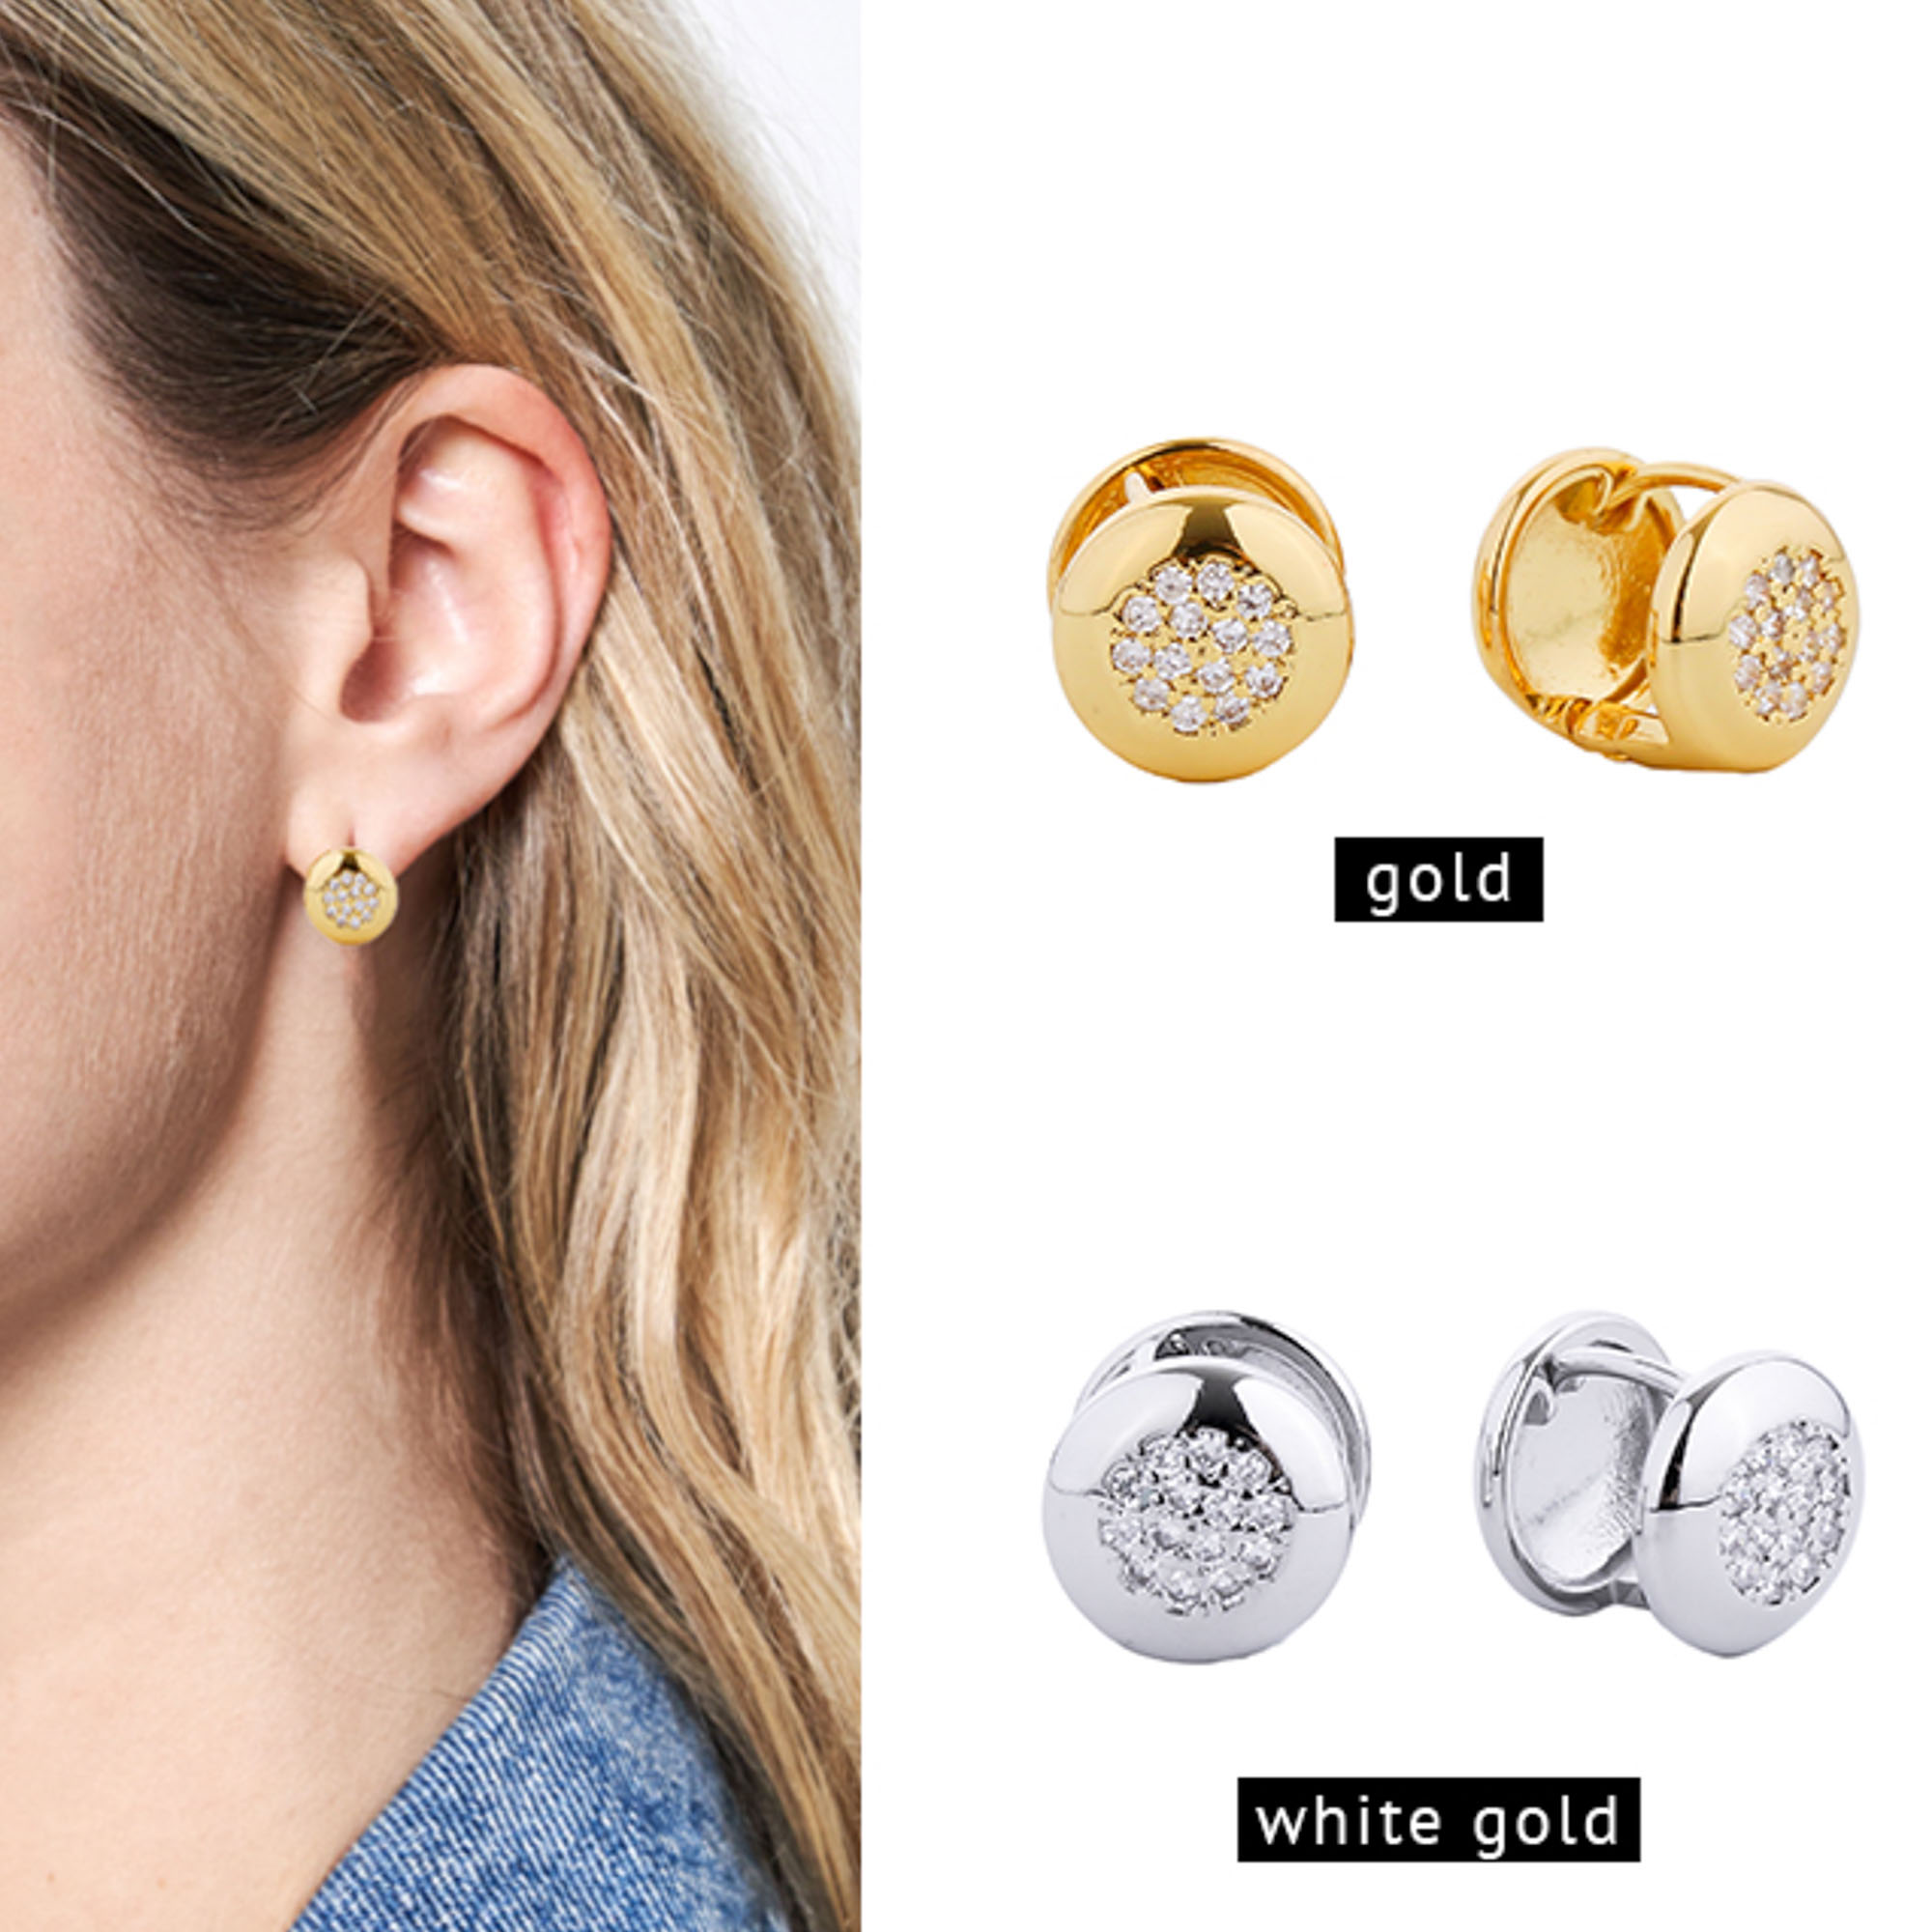 14K GOLD/WHITE GOLD DIPPED HUGGIE EARRING CZ PAVED EARRING